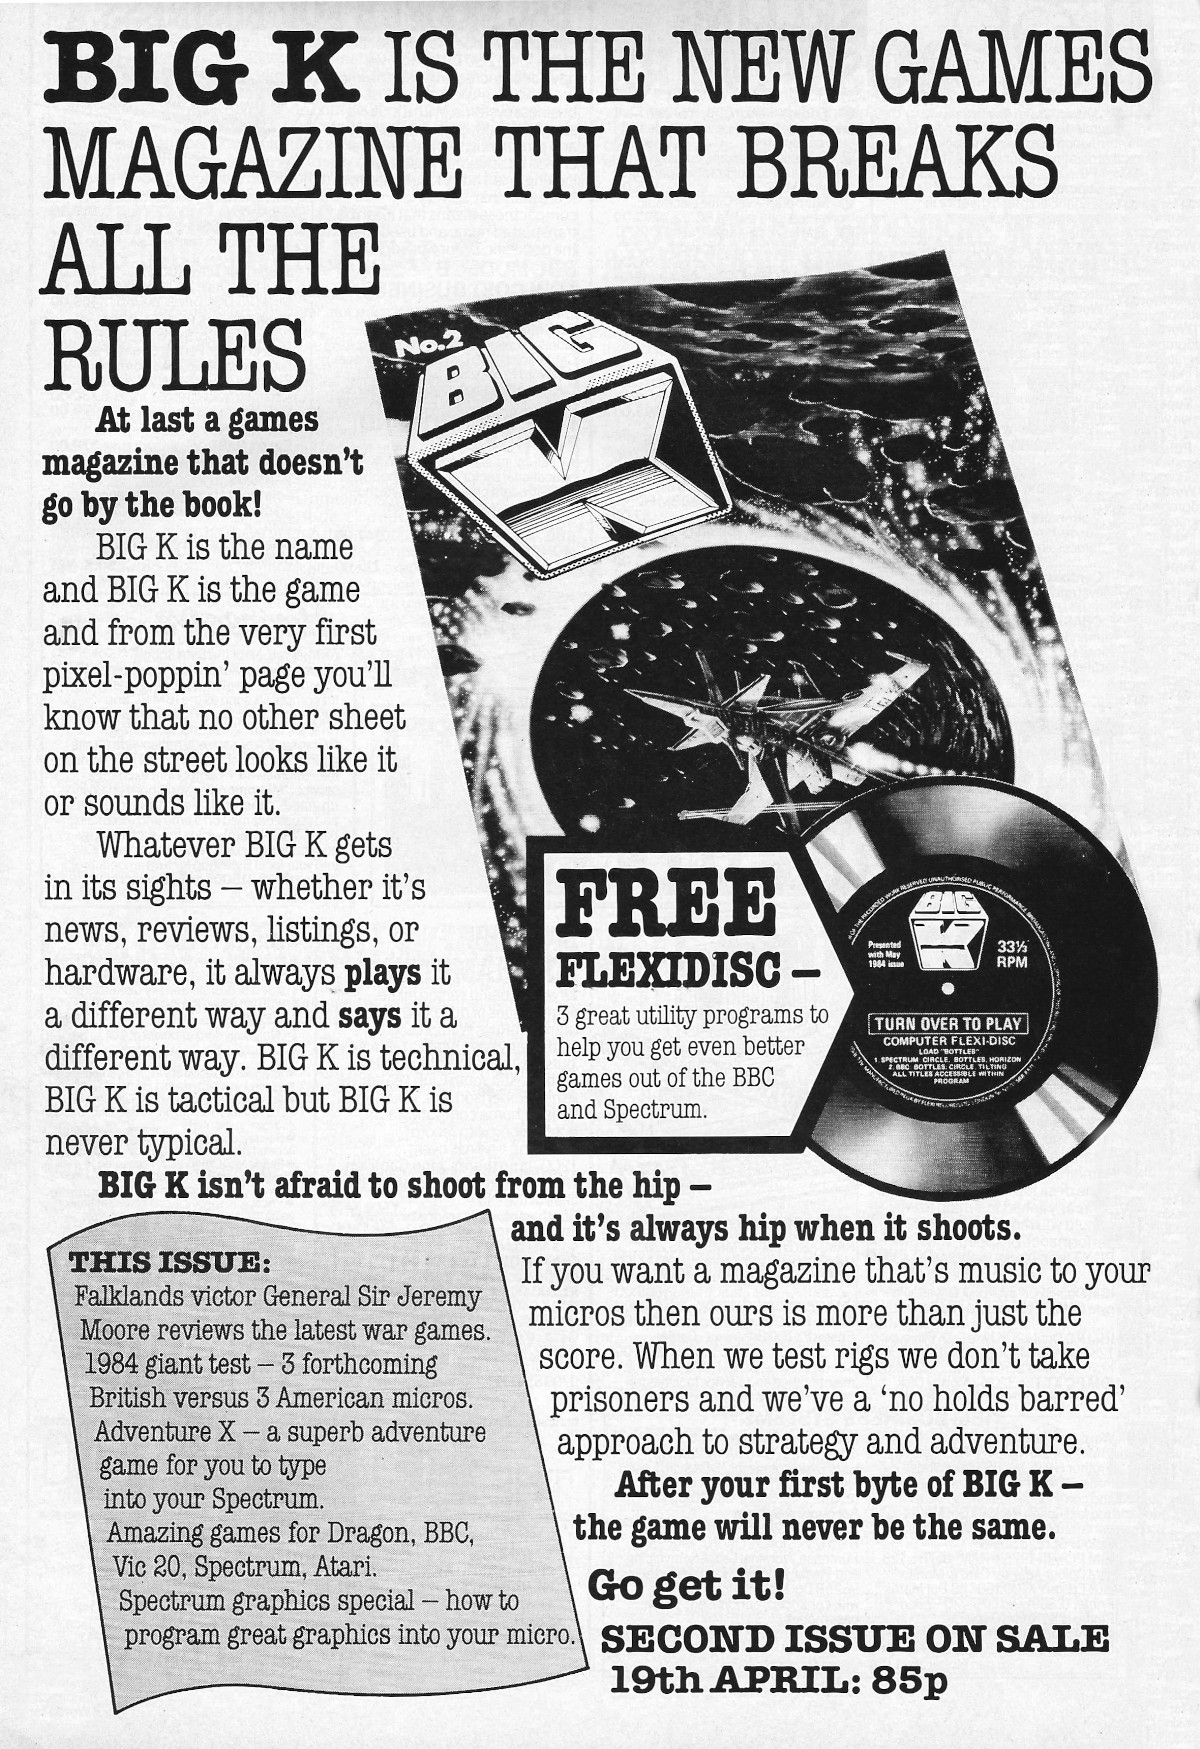 A flexidisc offered as part of the number 2 issue of <span class='hilite'>Big K</span> - the games magazine that 